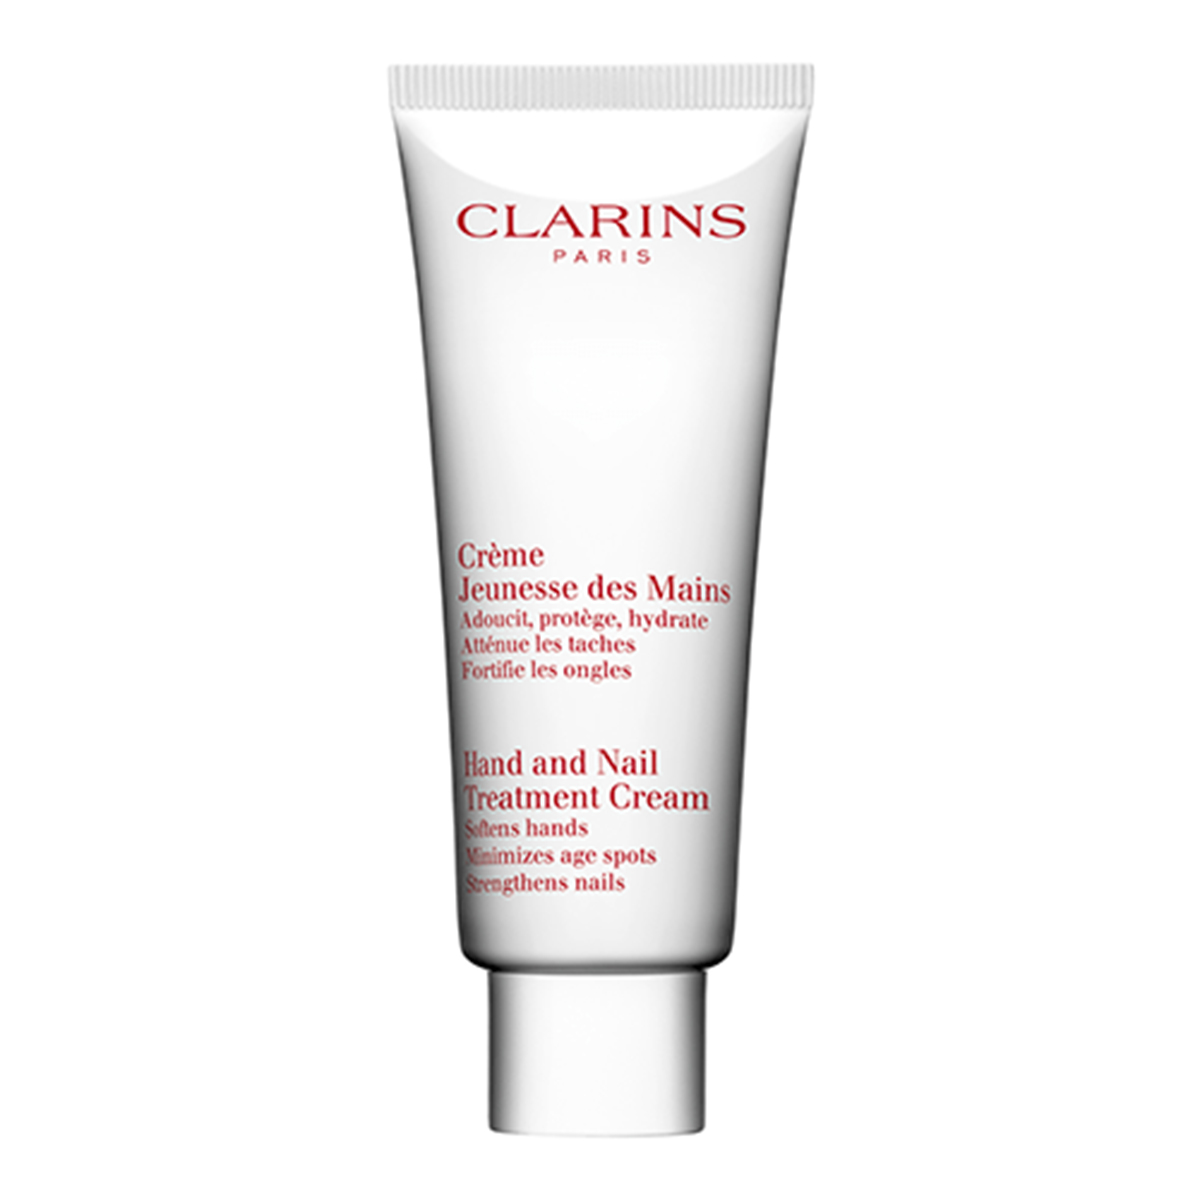 Tube of Clarins Hand And Nail Treatment Cream